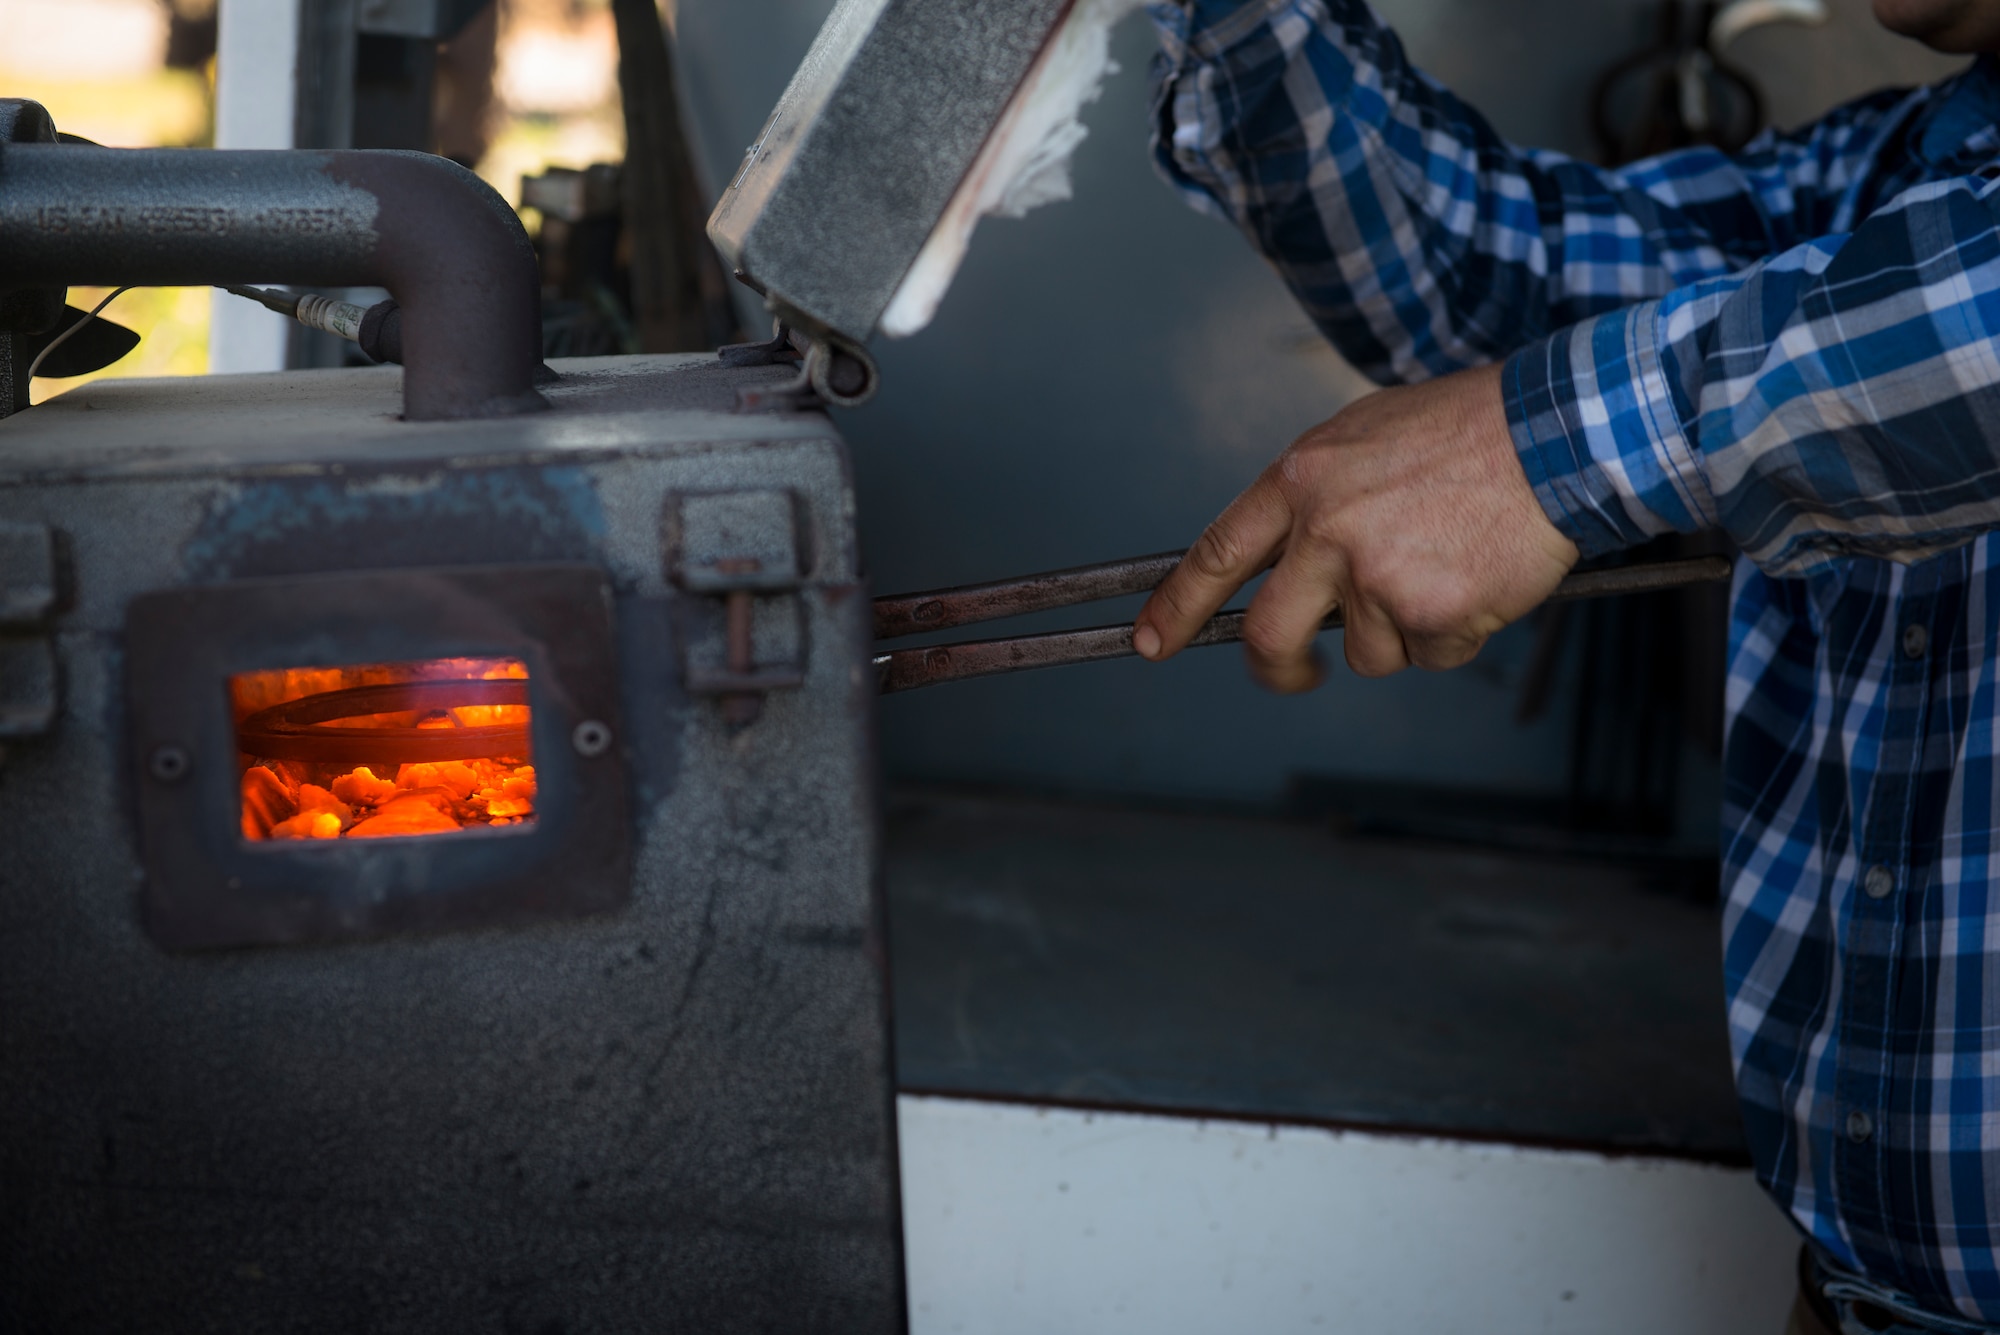 Chris Hume, an independent farrier on the central coast of California, heats a horseshoe until it's red-hot to start the process of re-shodding a horse. The military horses get re-shodded every six weeks. (U.S. Air Force photo/Staff Sgt. Andrew Lee)